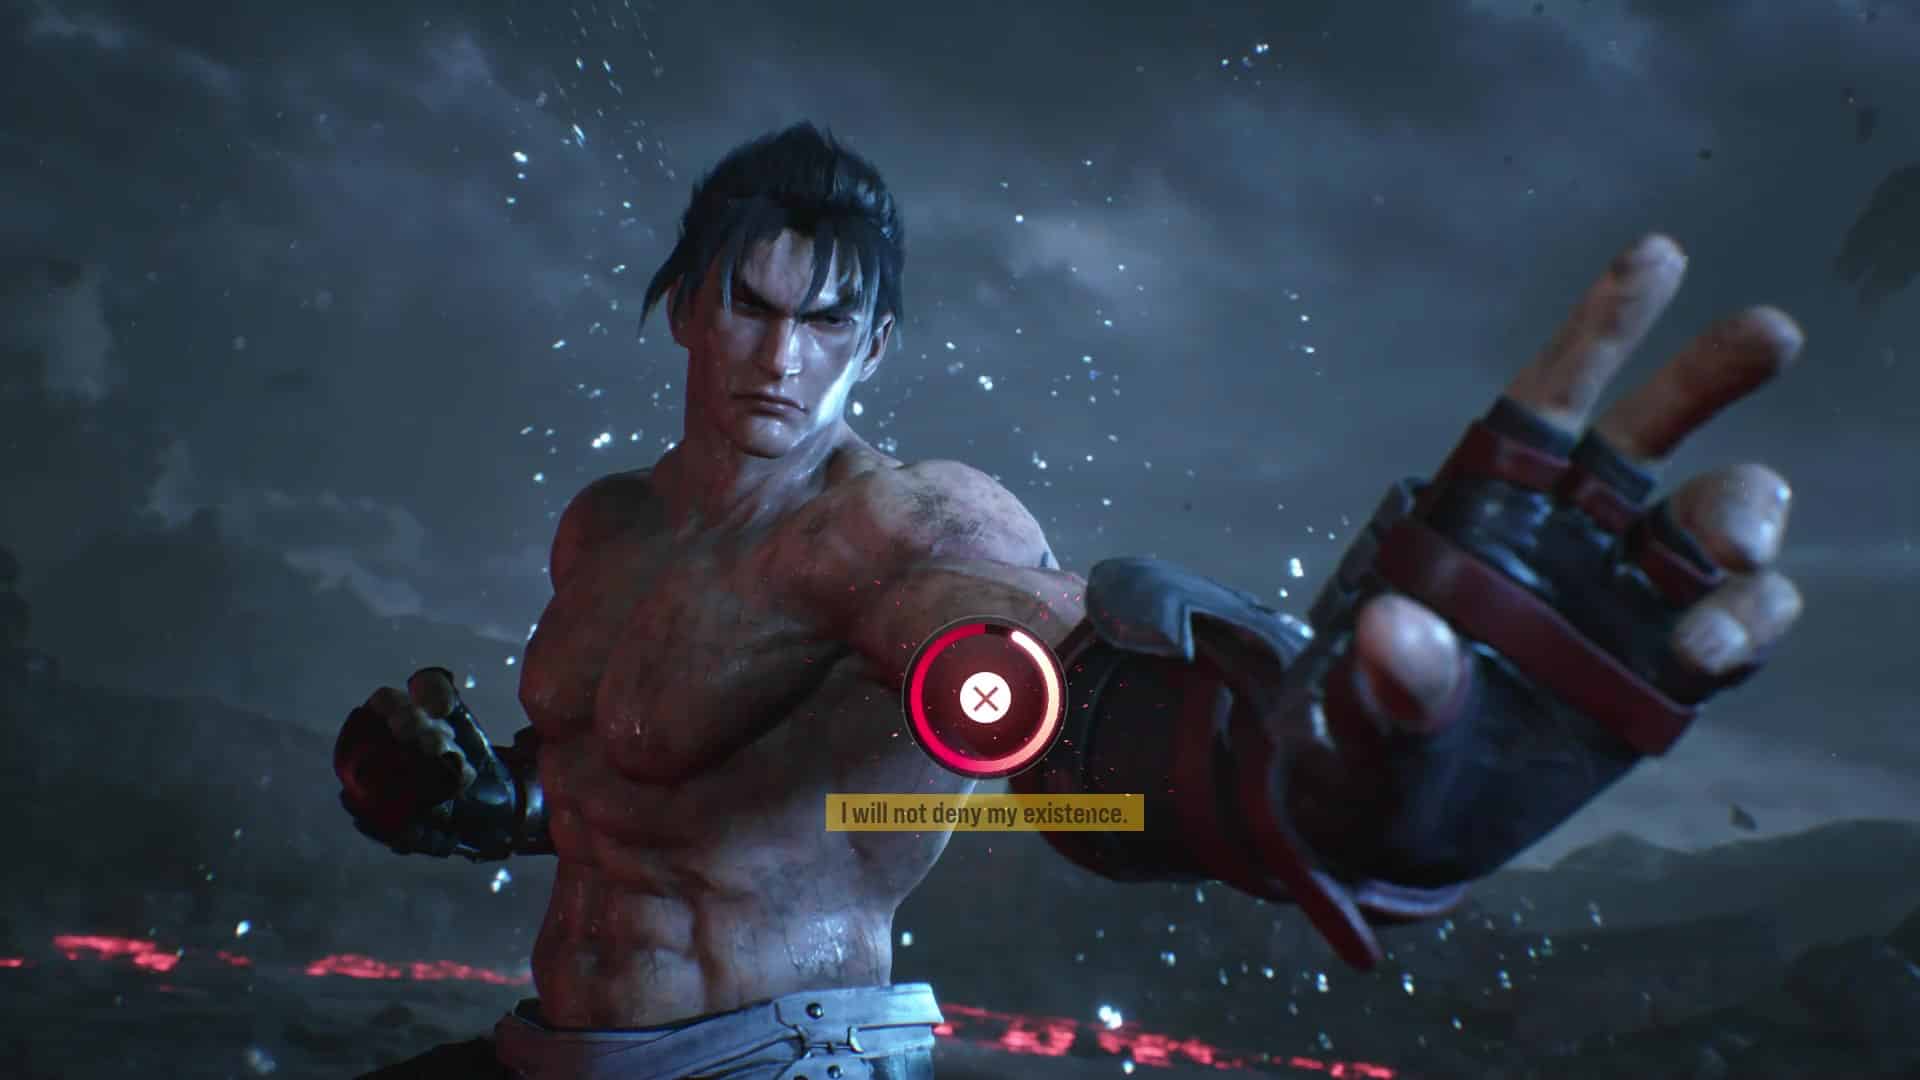 Tekken 8 bad ending: Jin performing a quick time event in the fight against Kazuya